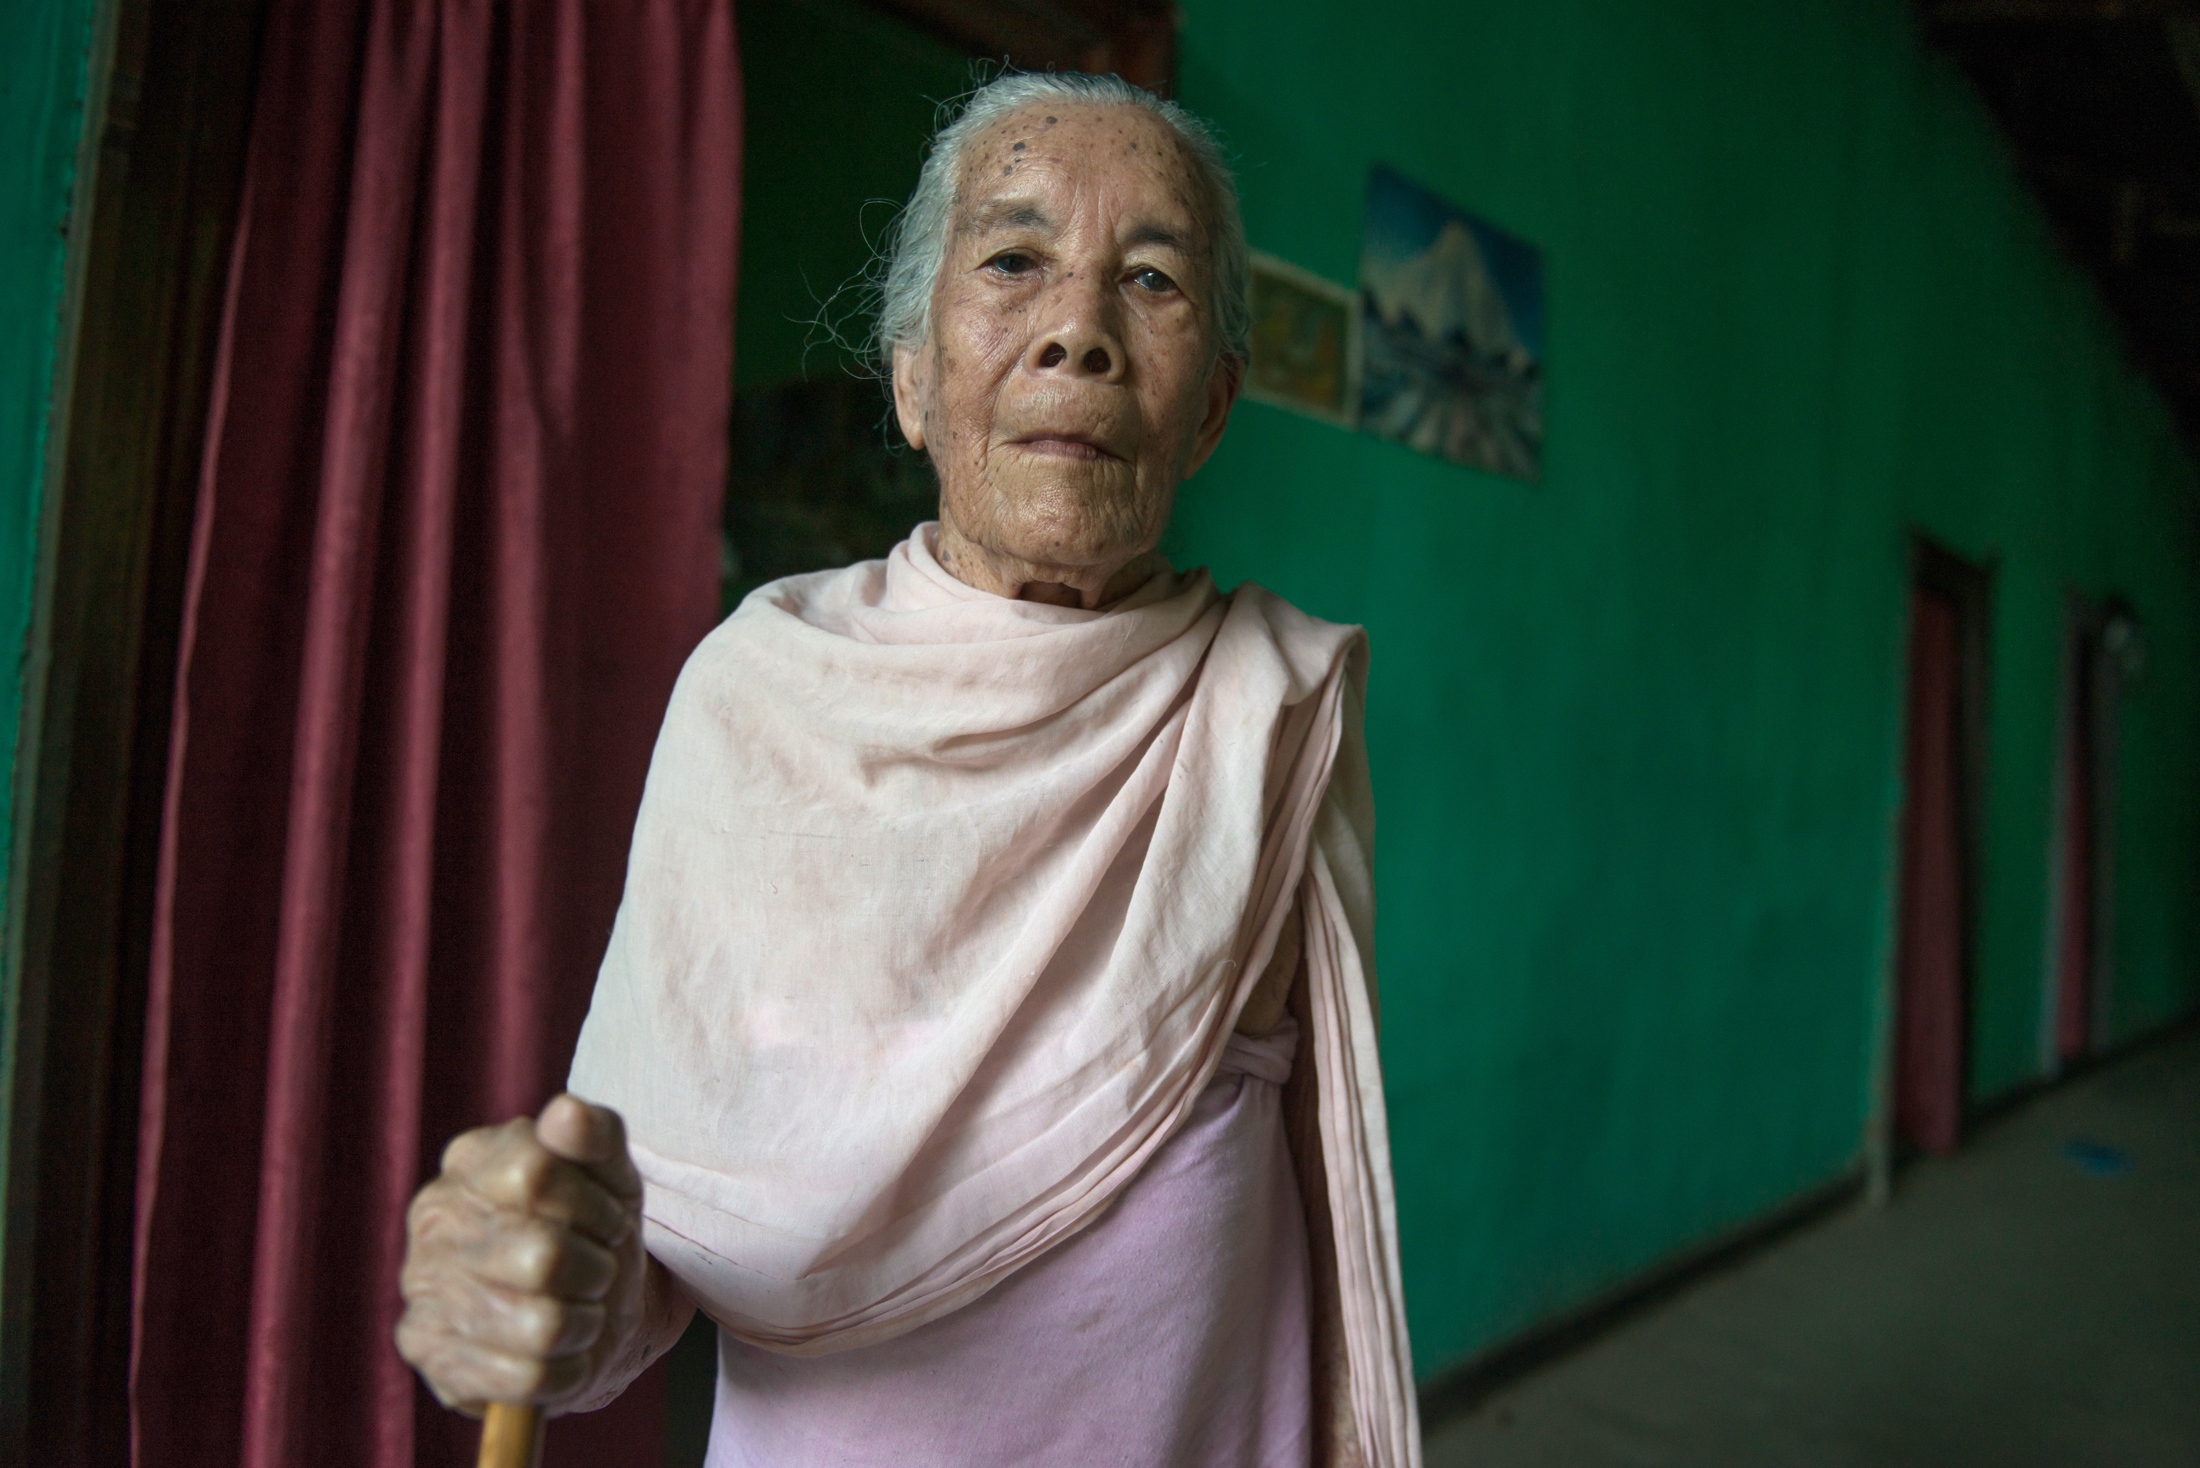  Sana Hanbi, a 92-year old resident of the village of Thanga Tongbram, poses for a portrait. 